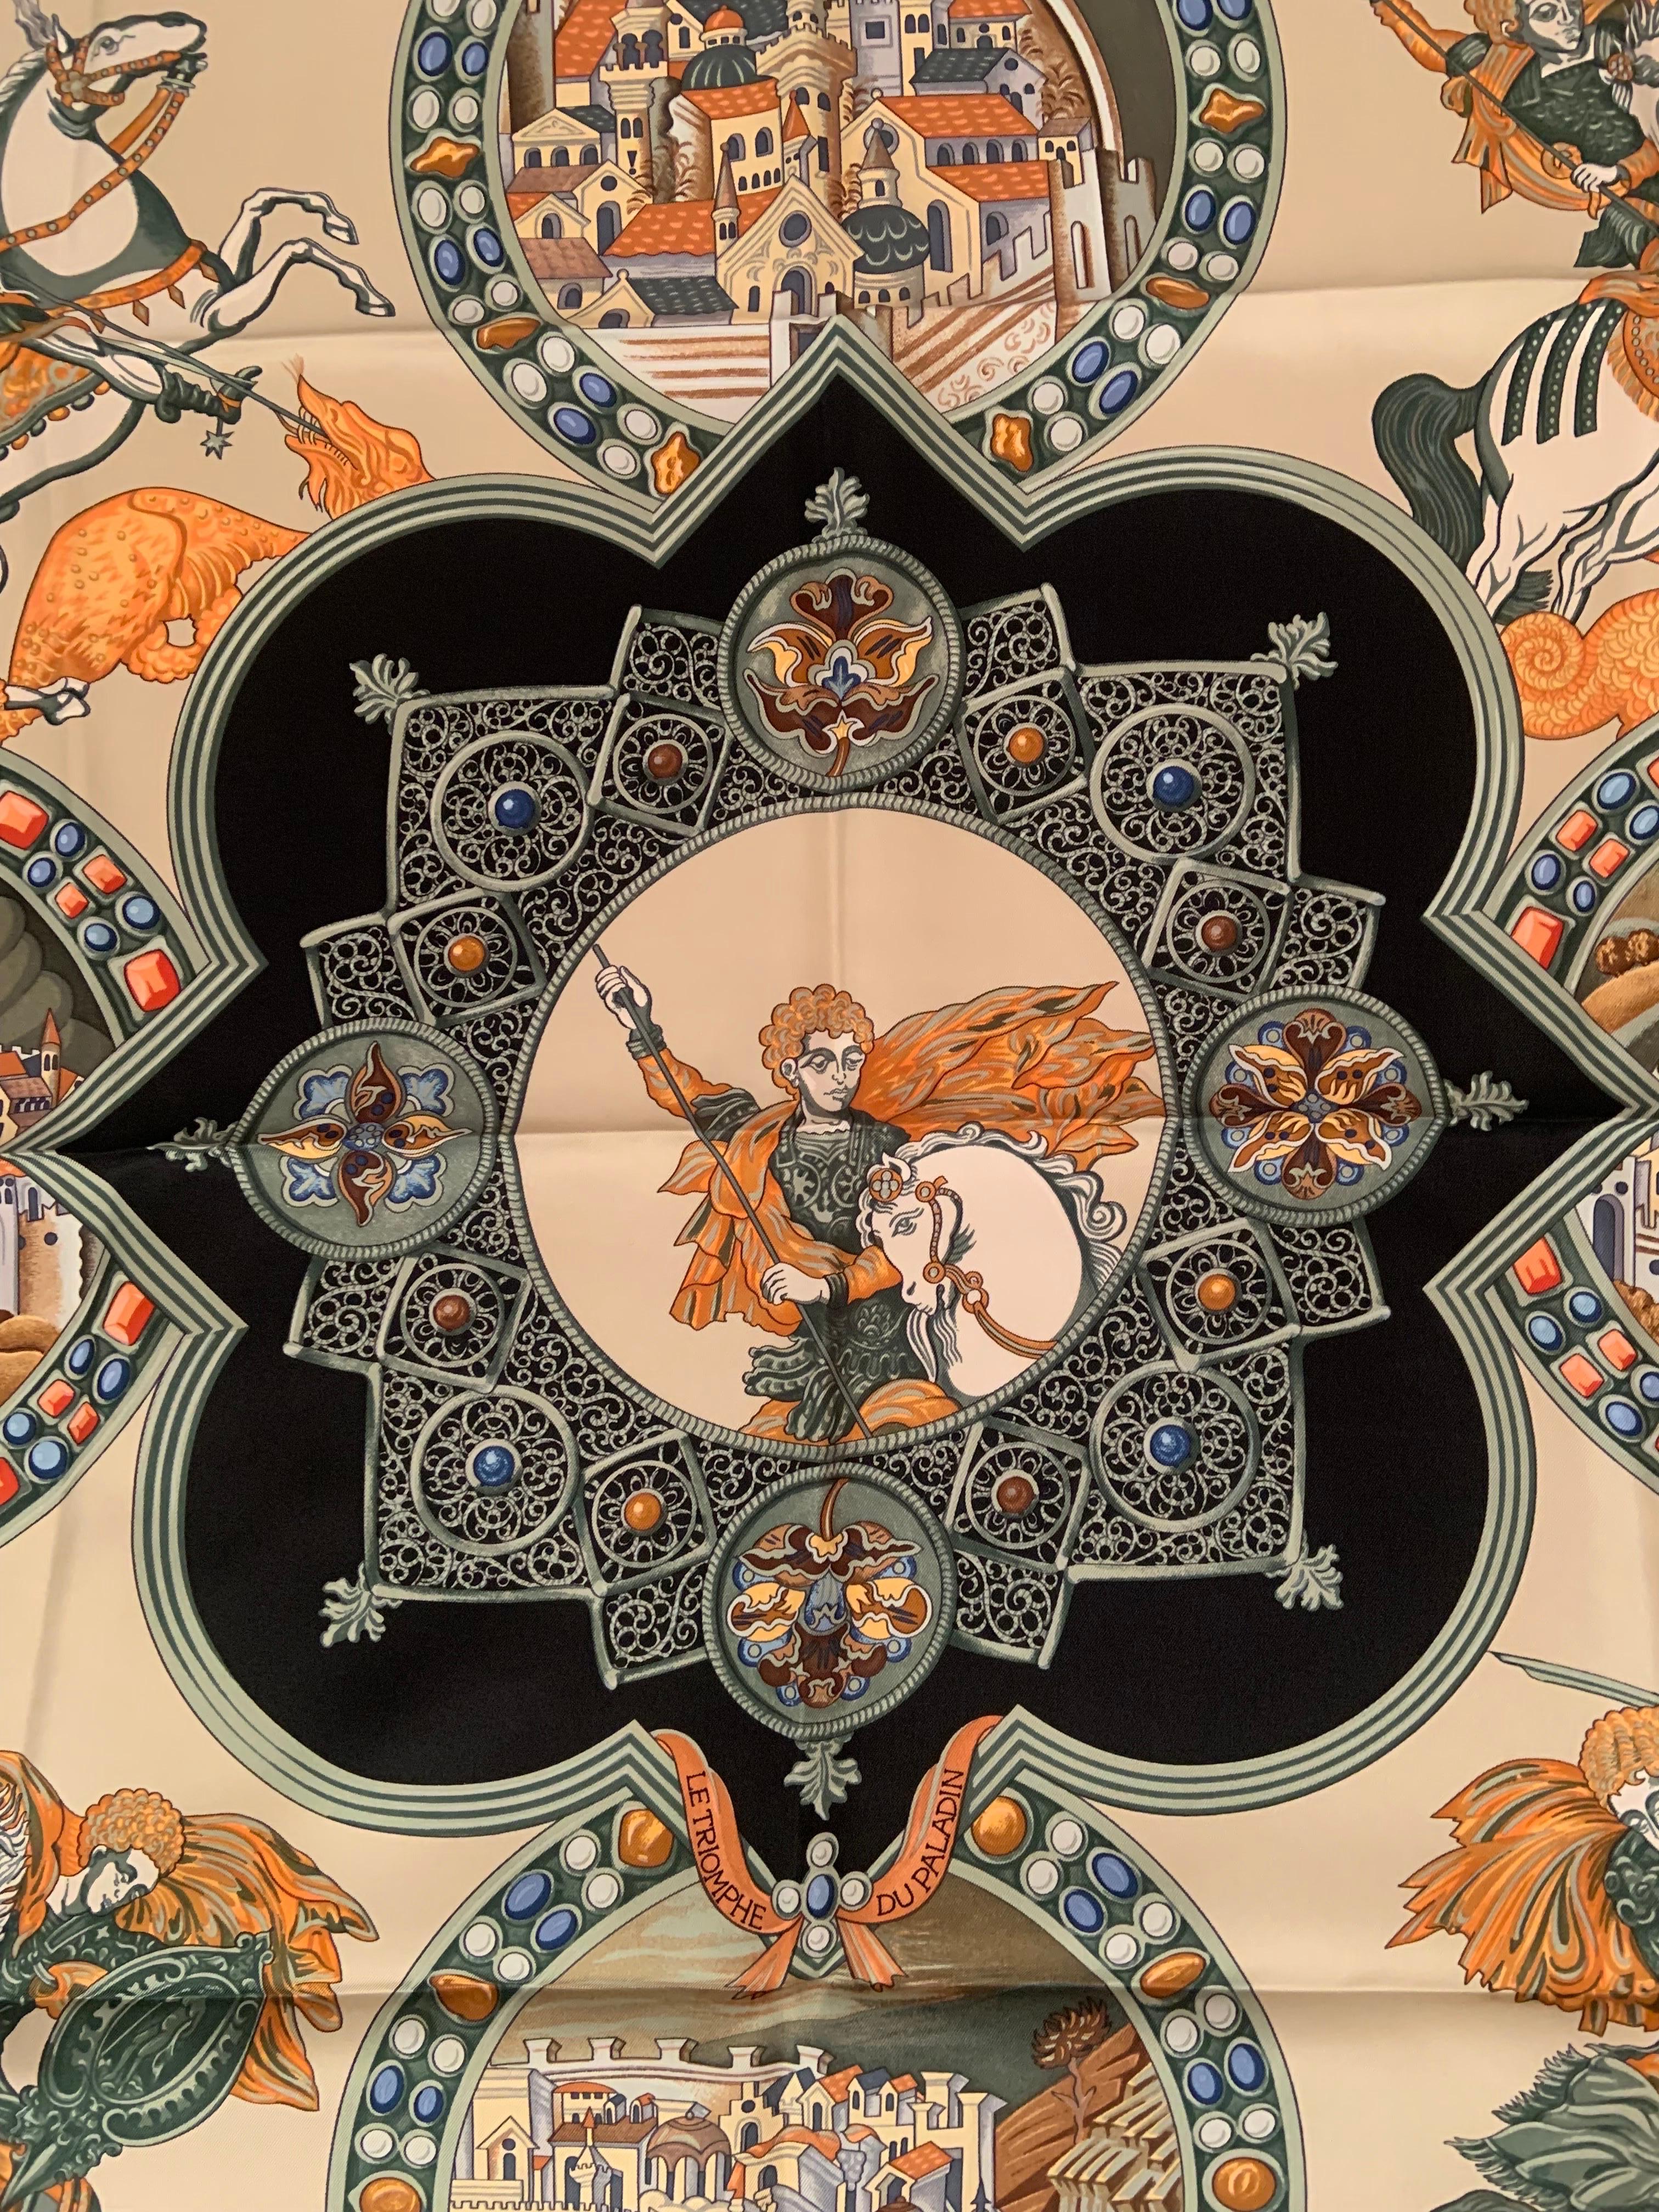 This stunning Hermes scarf was designed by Julia Abadie for Hermes, Paris in 1999.  It depicts a Knight of the court of Charlemagne.  These knights were famous for their heroism and chivalry.  The scarf has never been worn and is in excellent